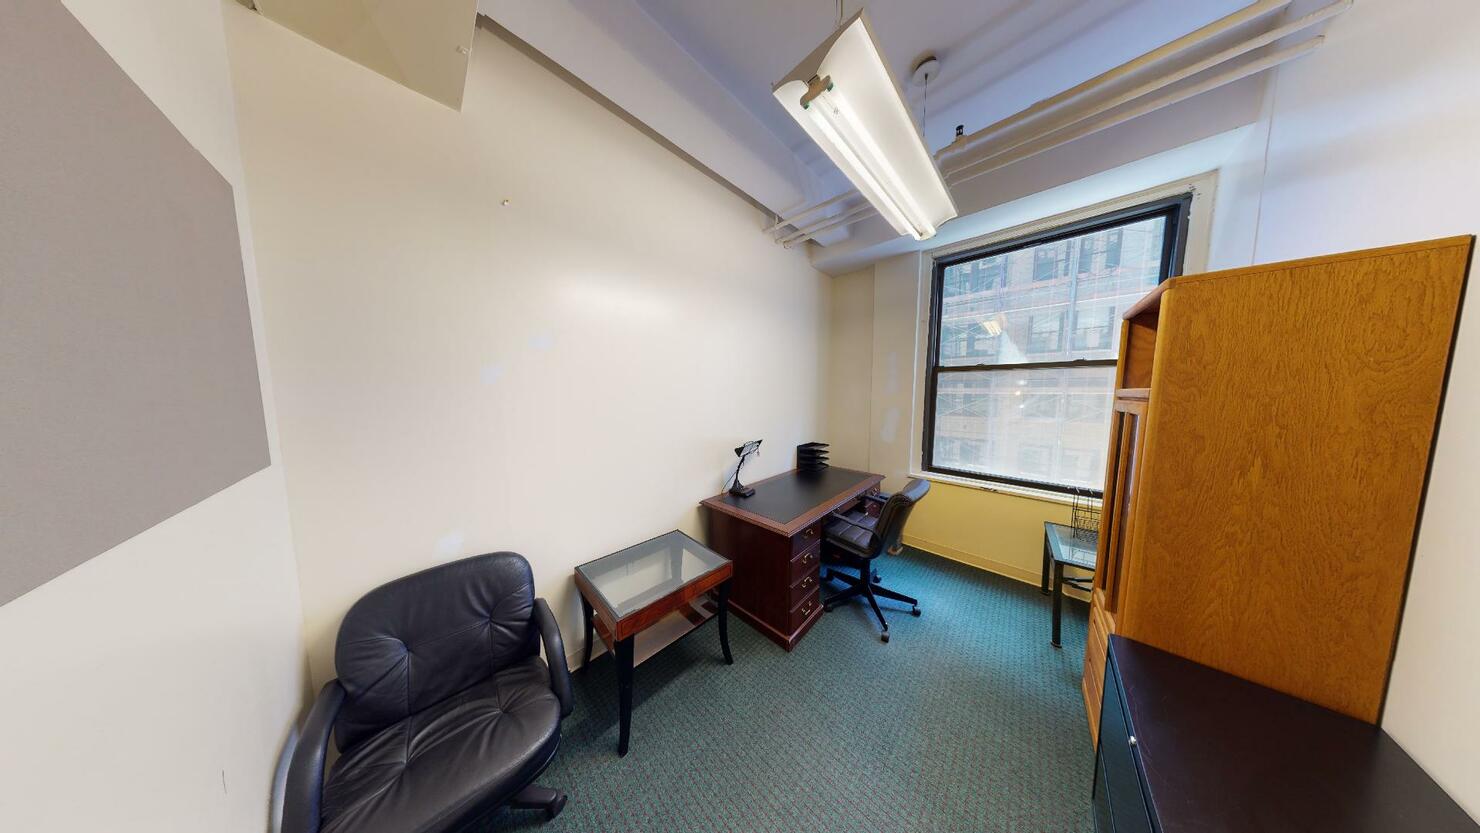 247 West 35th Street Office Space - small private office room with large window